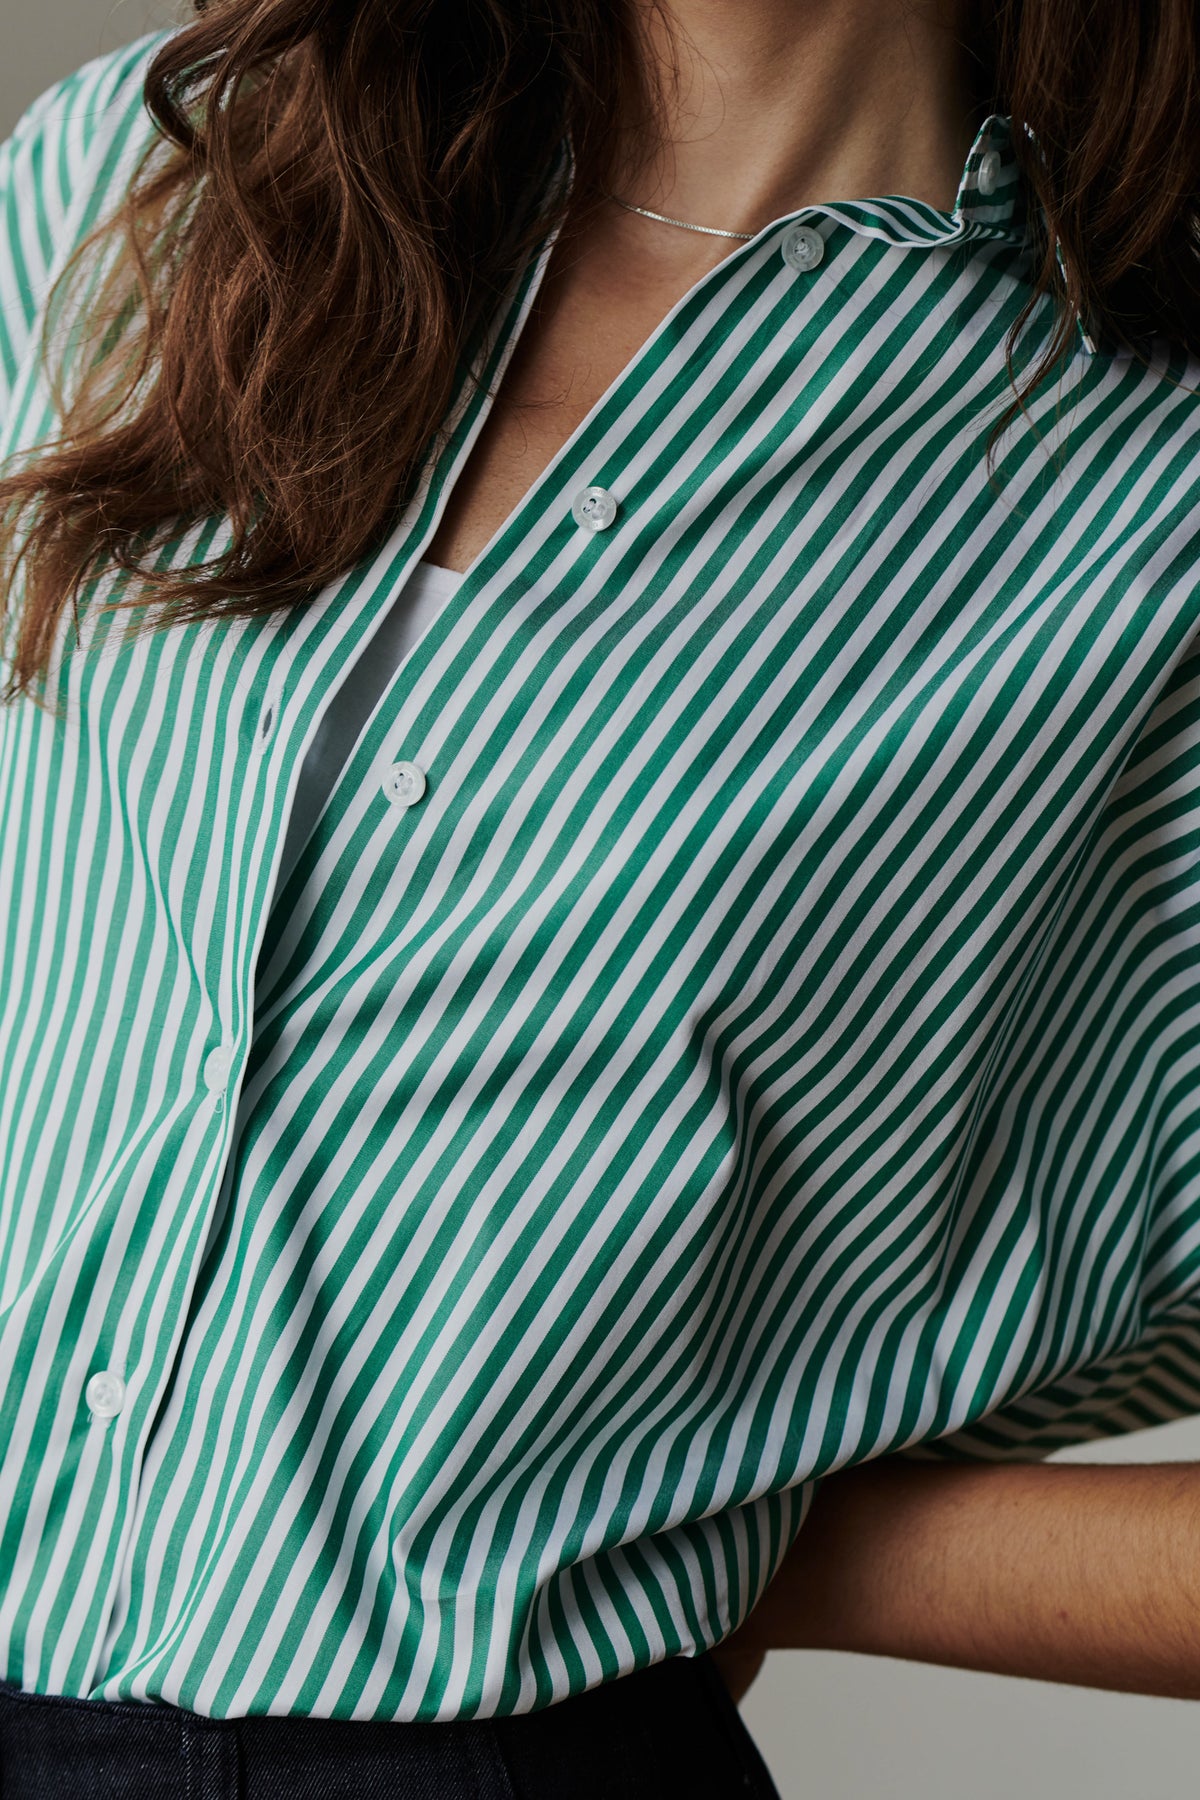 
            close up detail shot of unbuttoned green and white striped shirt